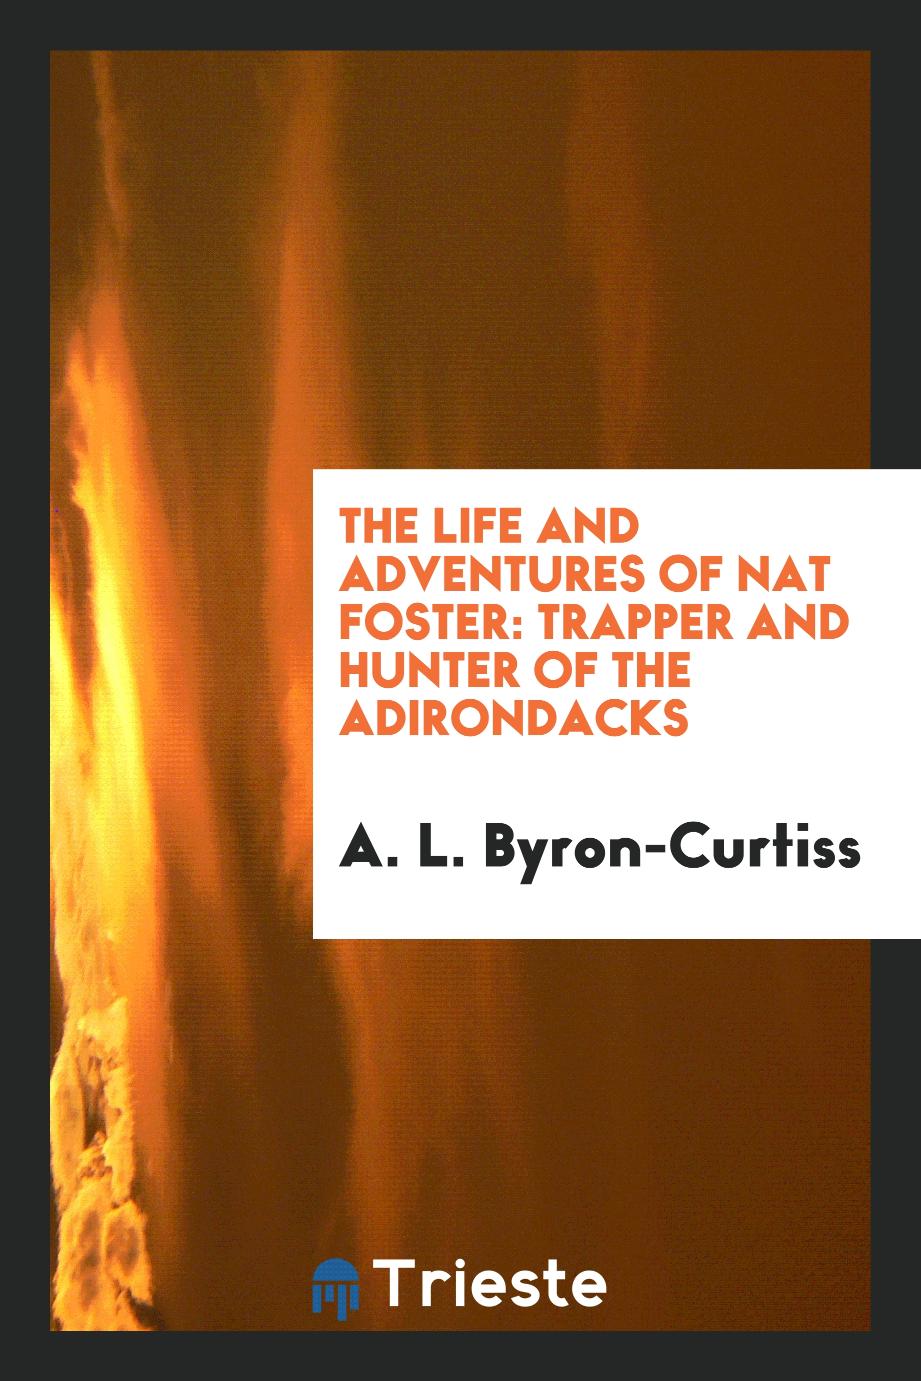 A. L. Byron-Curtiss - The Life and Adventures of Nat Foster: Trapper and Hunter of the Adirondacks